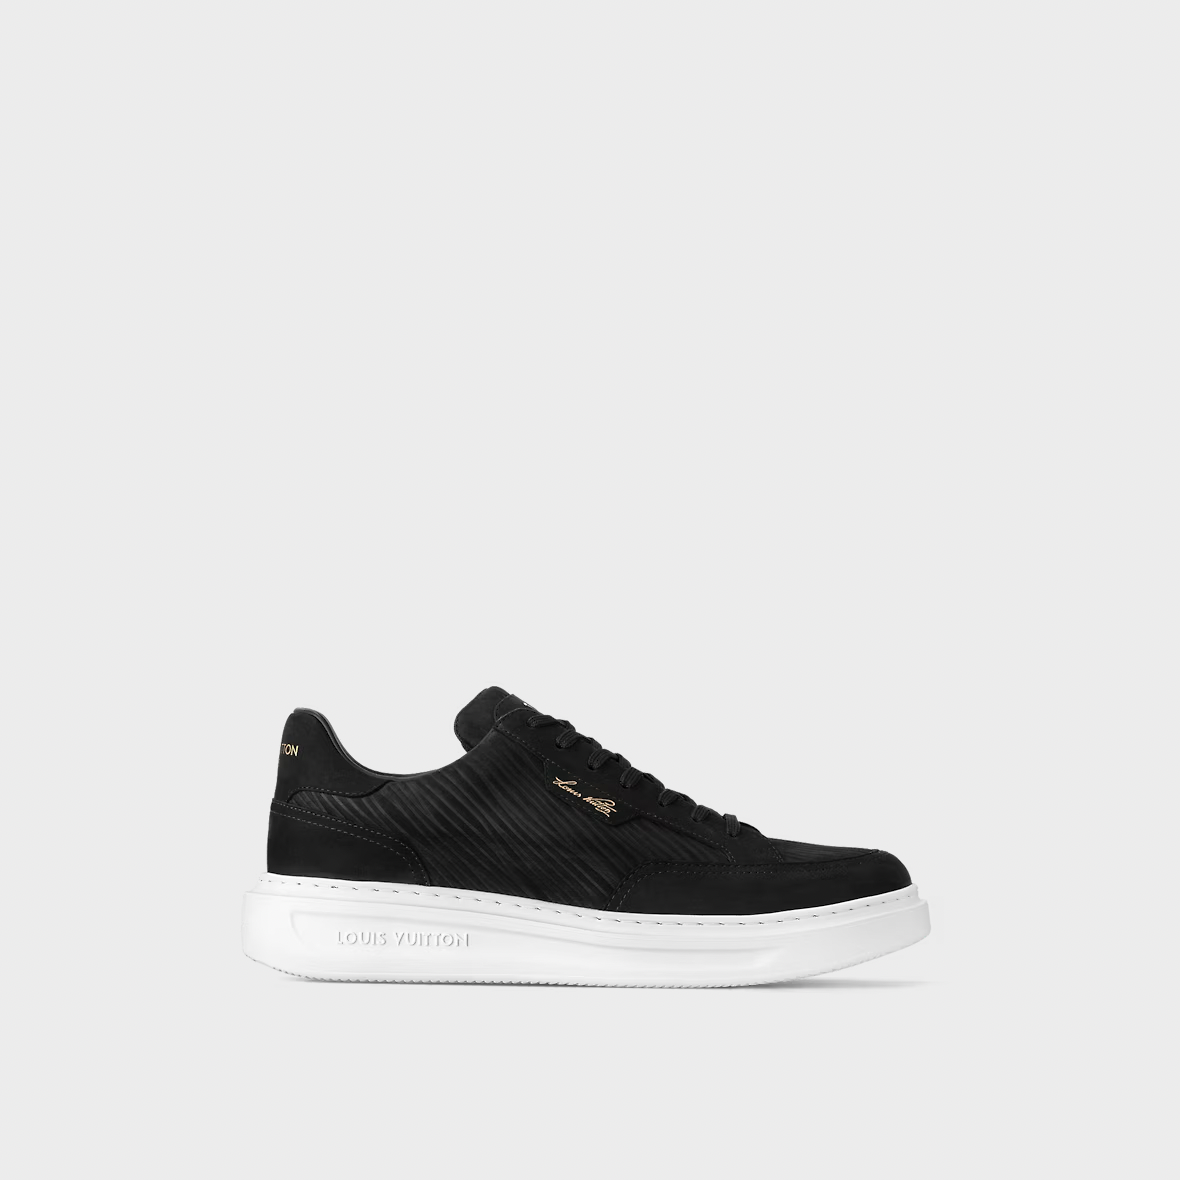 Louis Vuitton Beverly Hills Sneakers "Black"